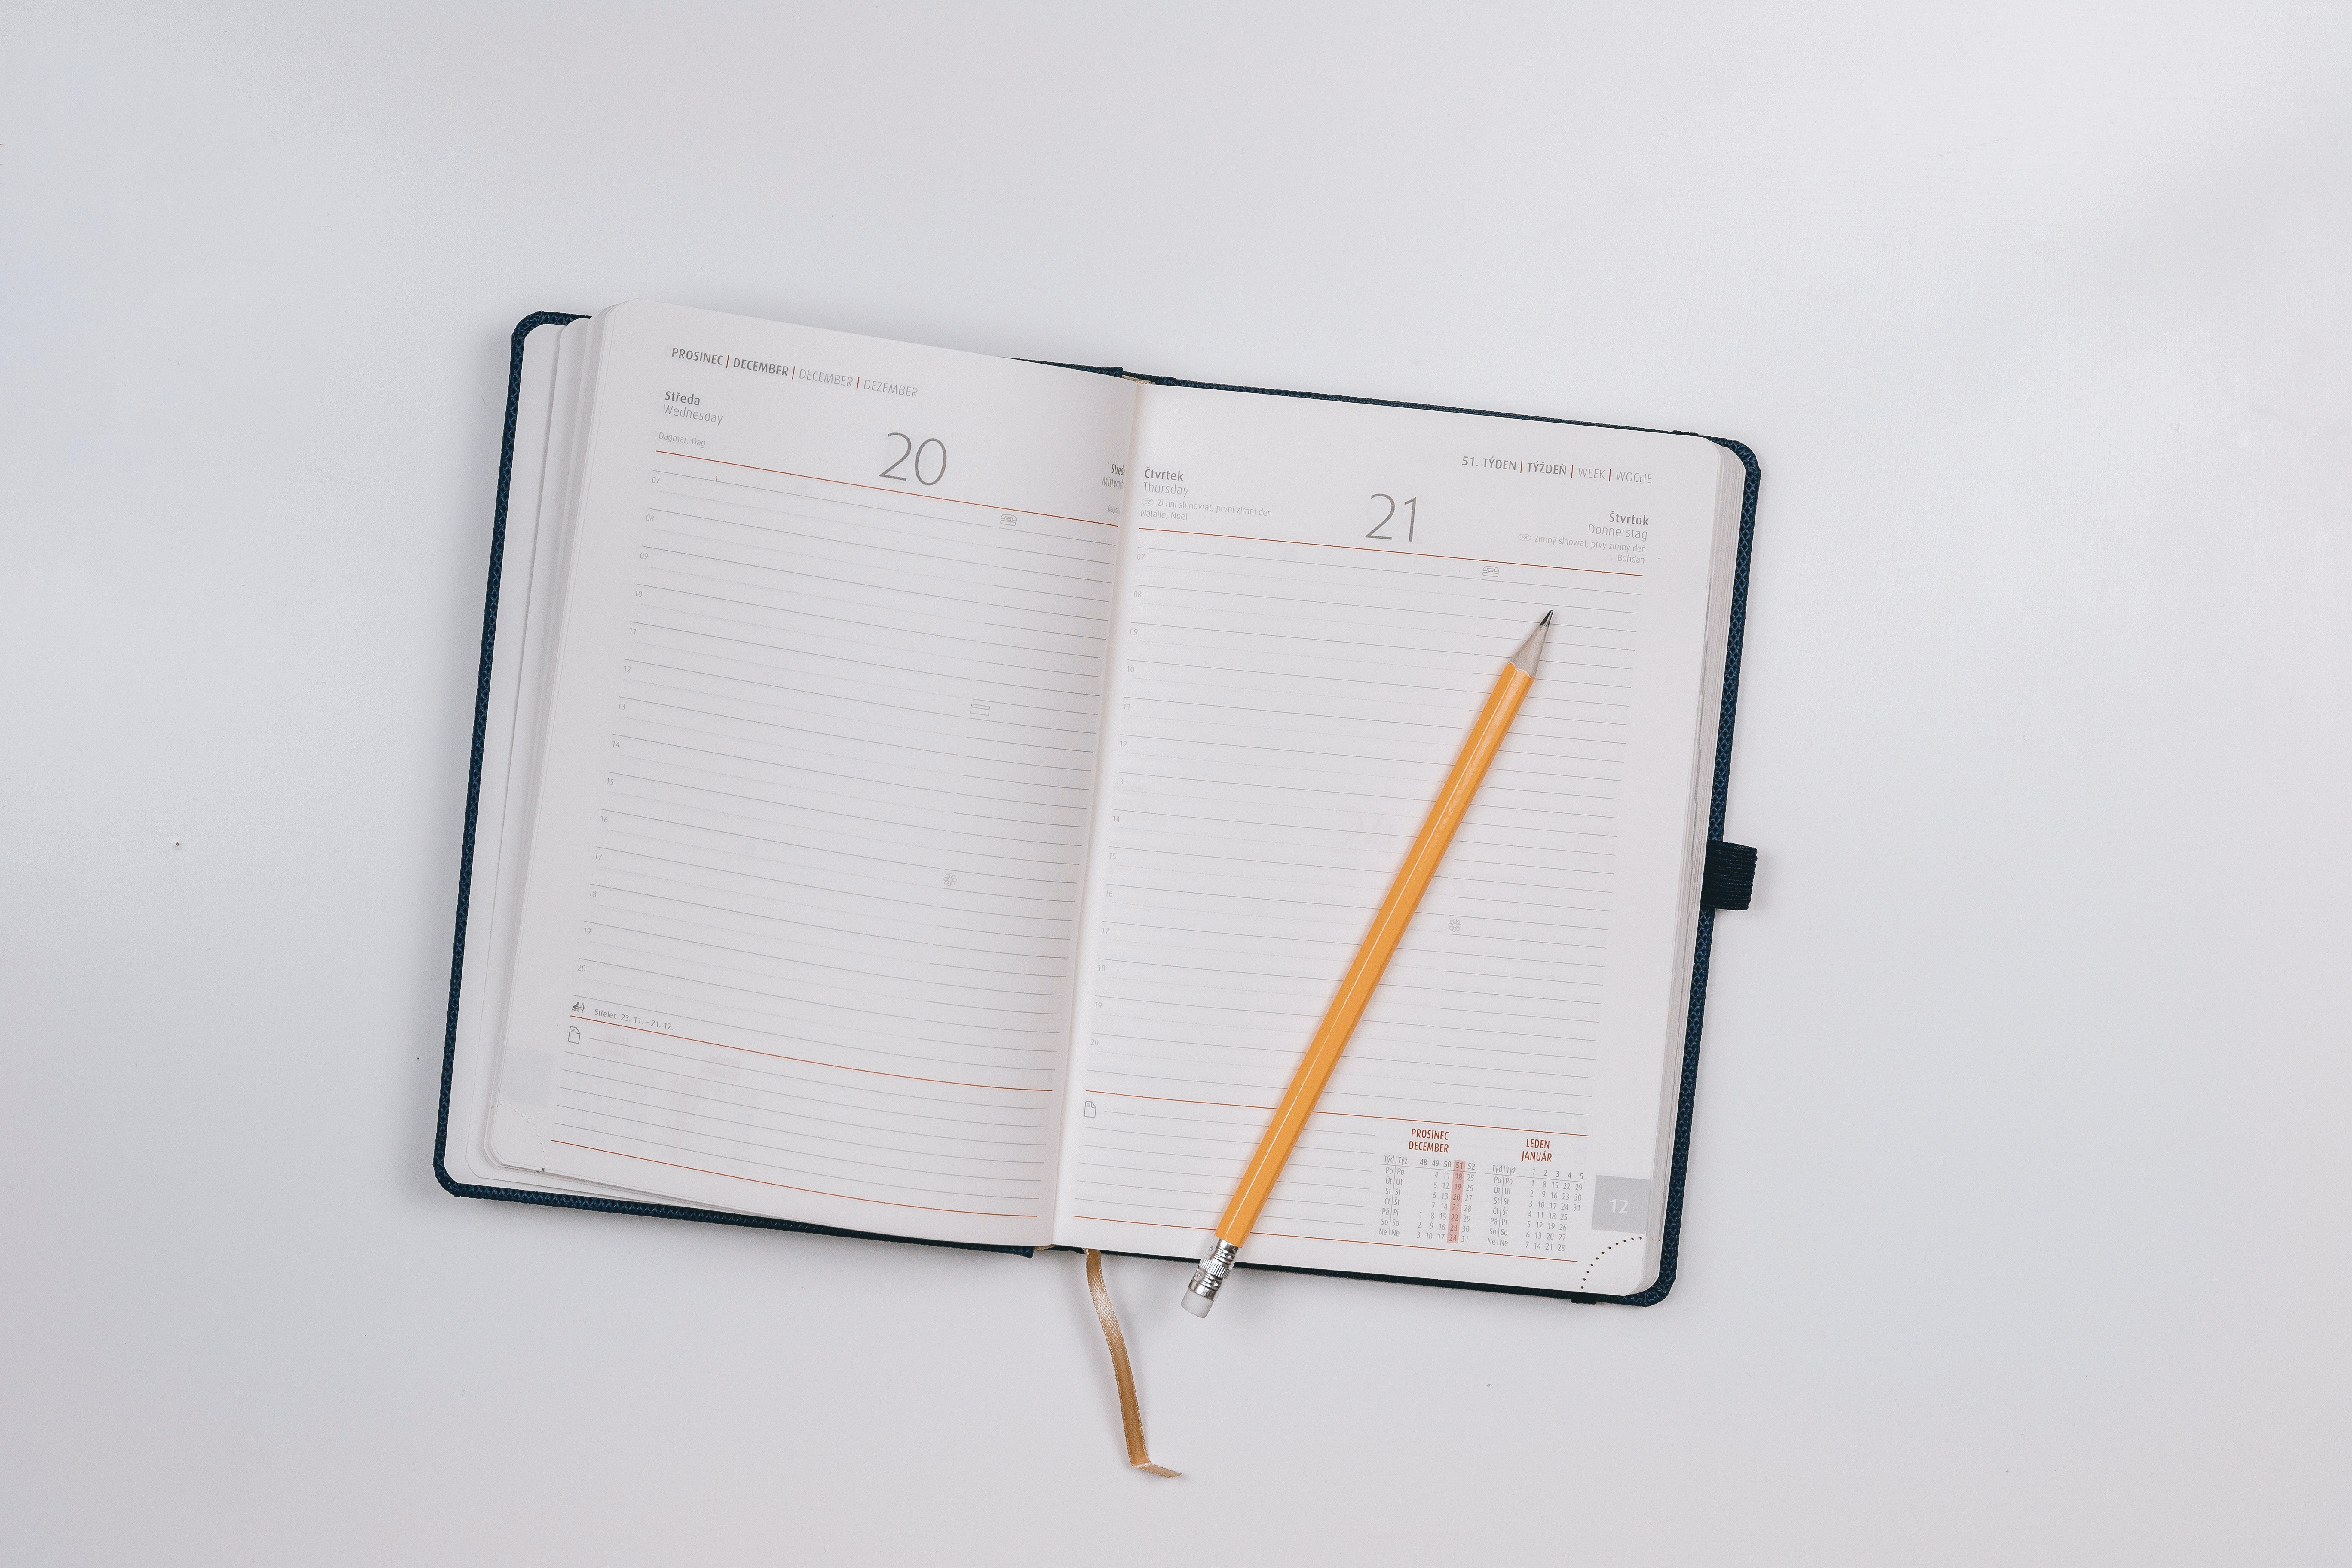 A standard day planner with a pencil